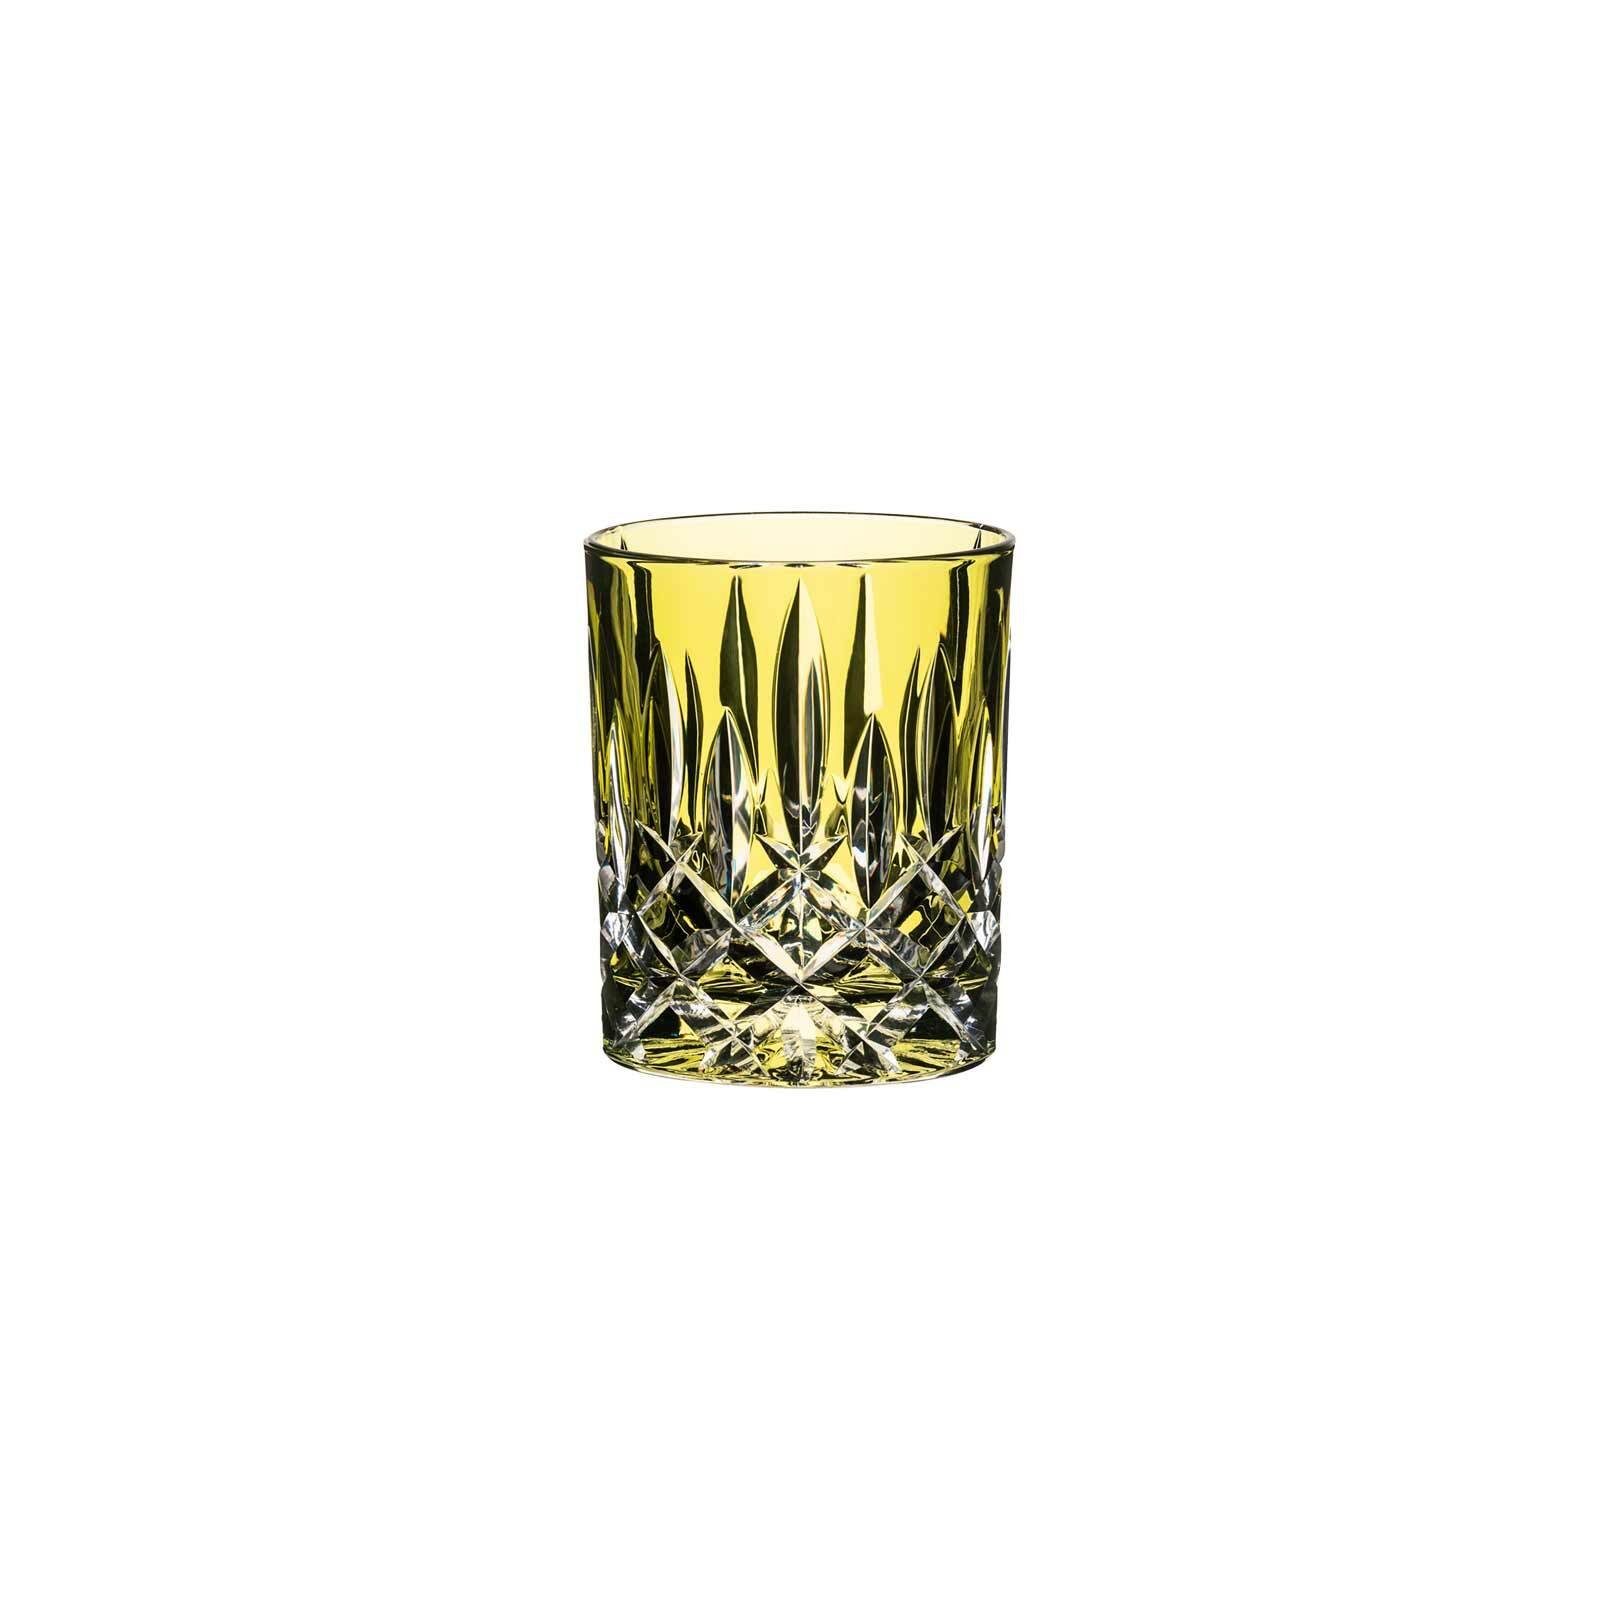 RIEDEL THE WINE GLASS COMPANY Whiskyglas Laudon Whiskyglas 295 ml, Glas